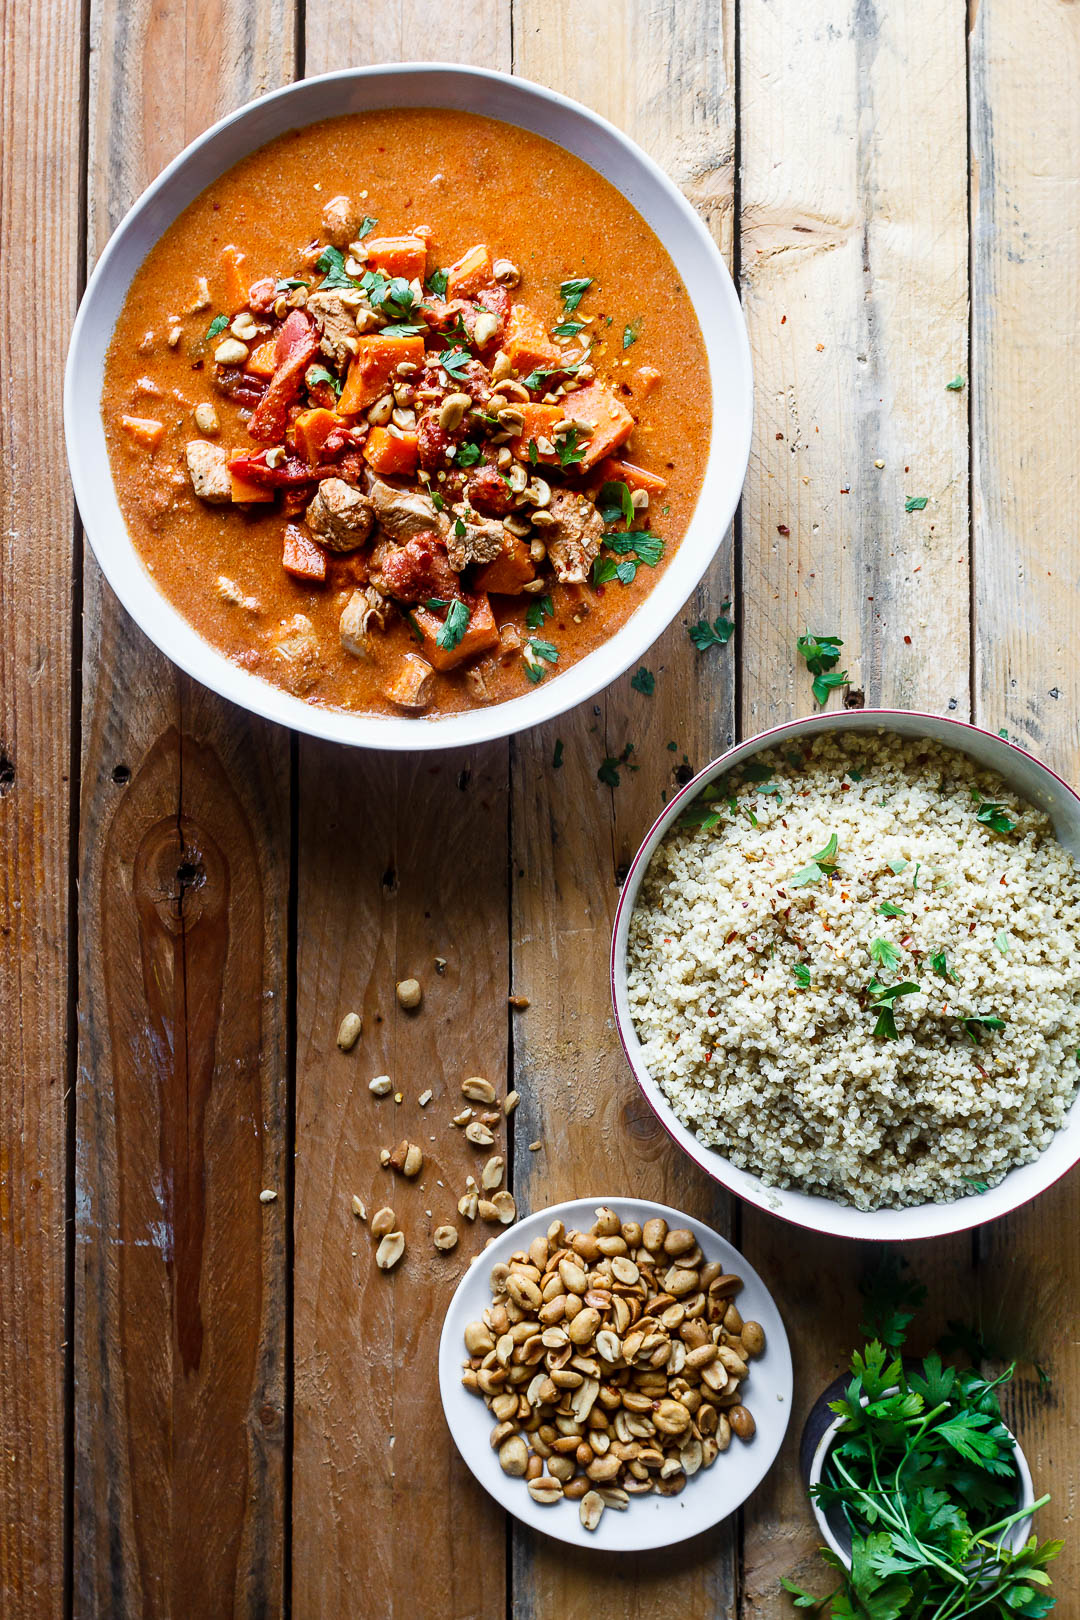 African inspired Crockpot soup with peanut butter, chili, brown rice and lentils